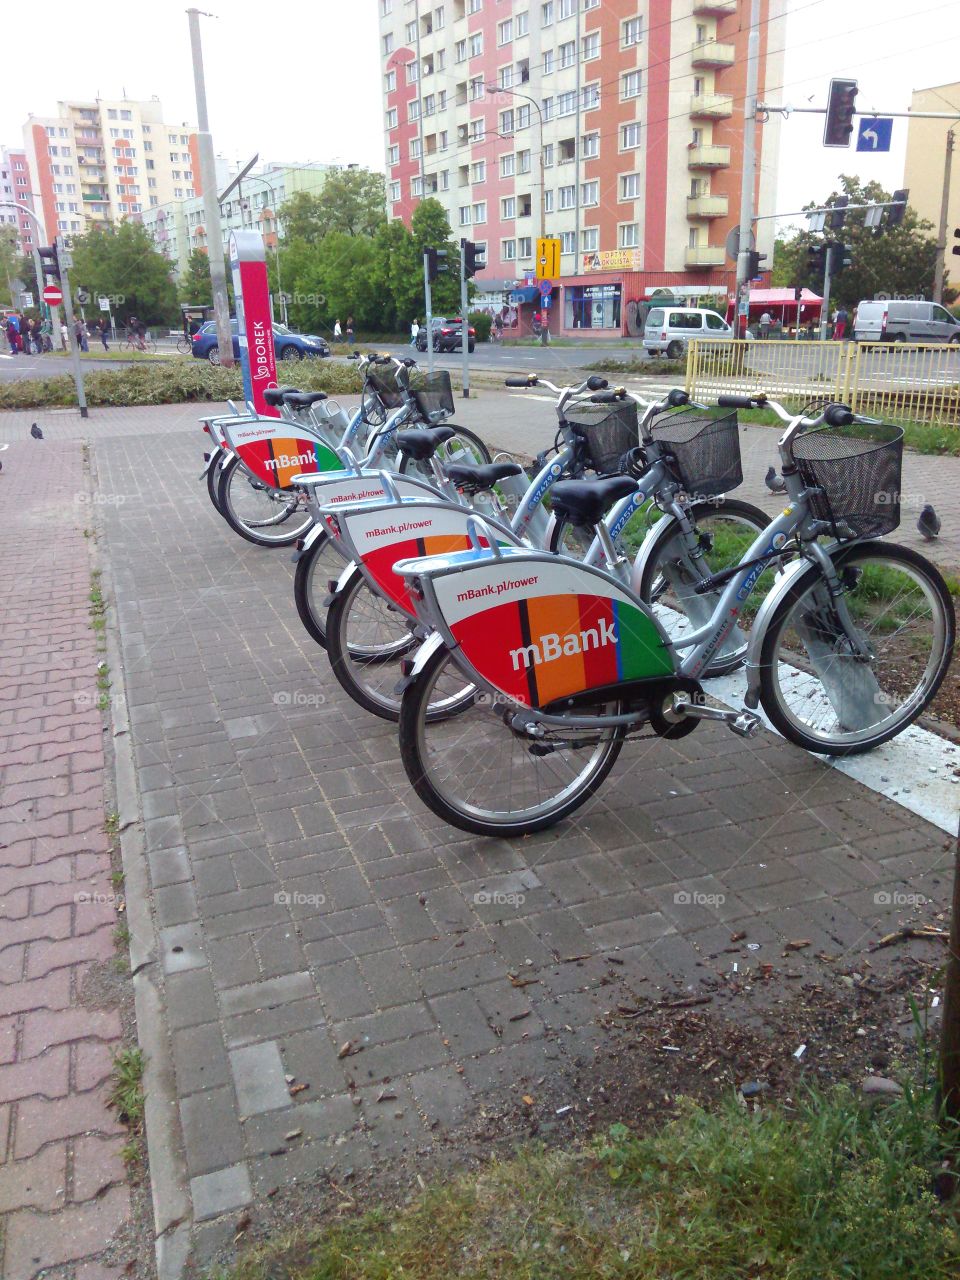 bicycles for hire. This photo has been taken in Wroclaw city